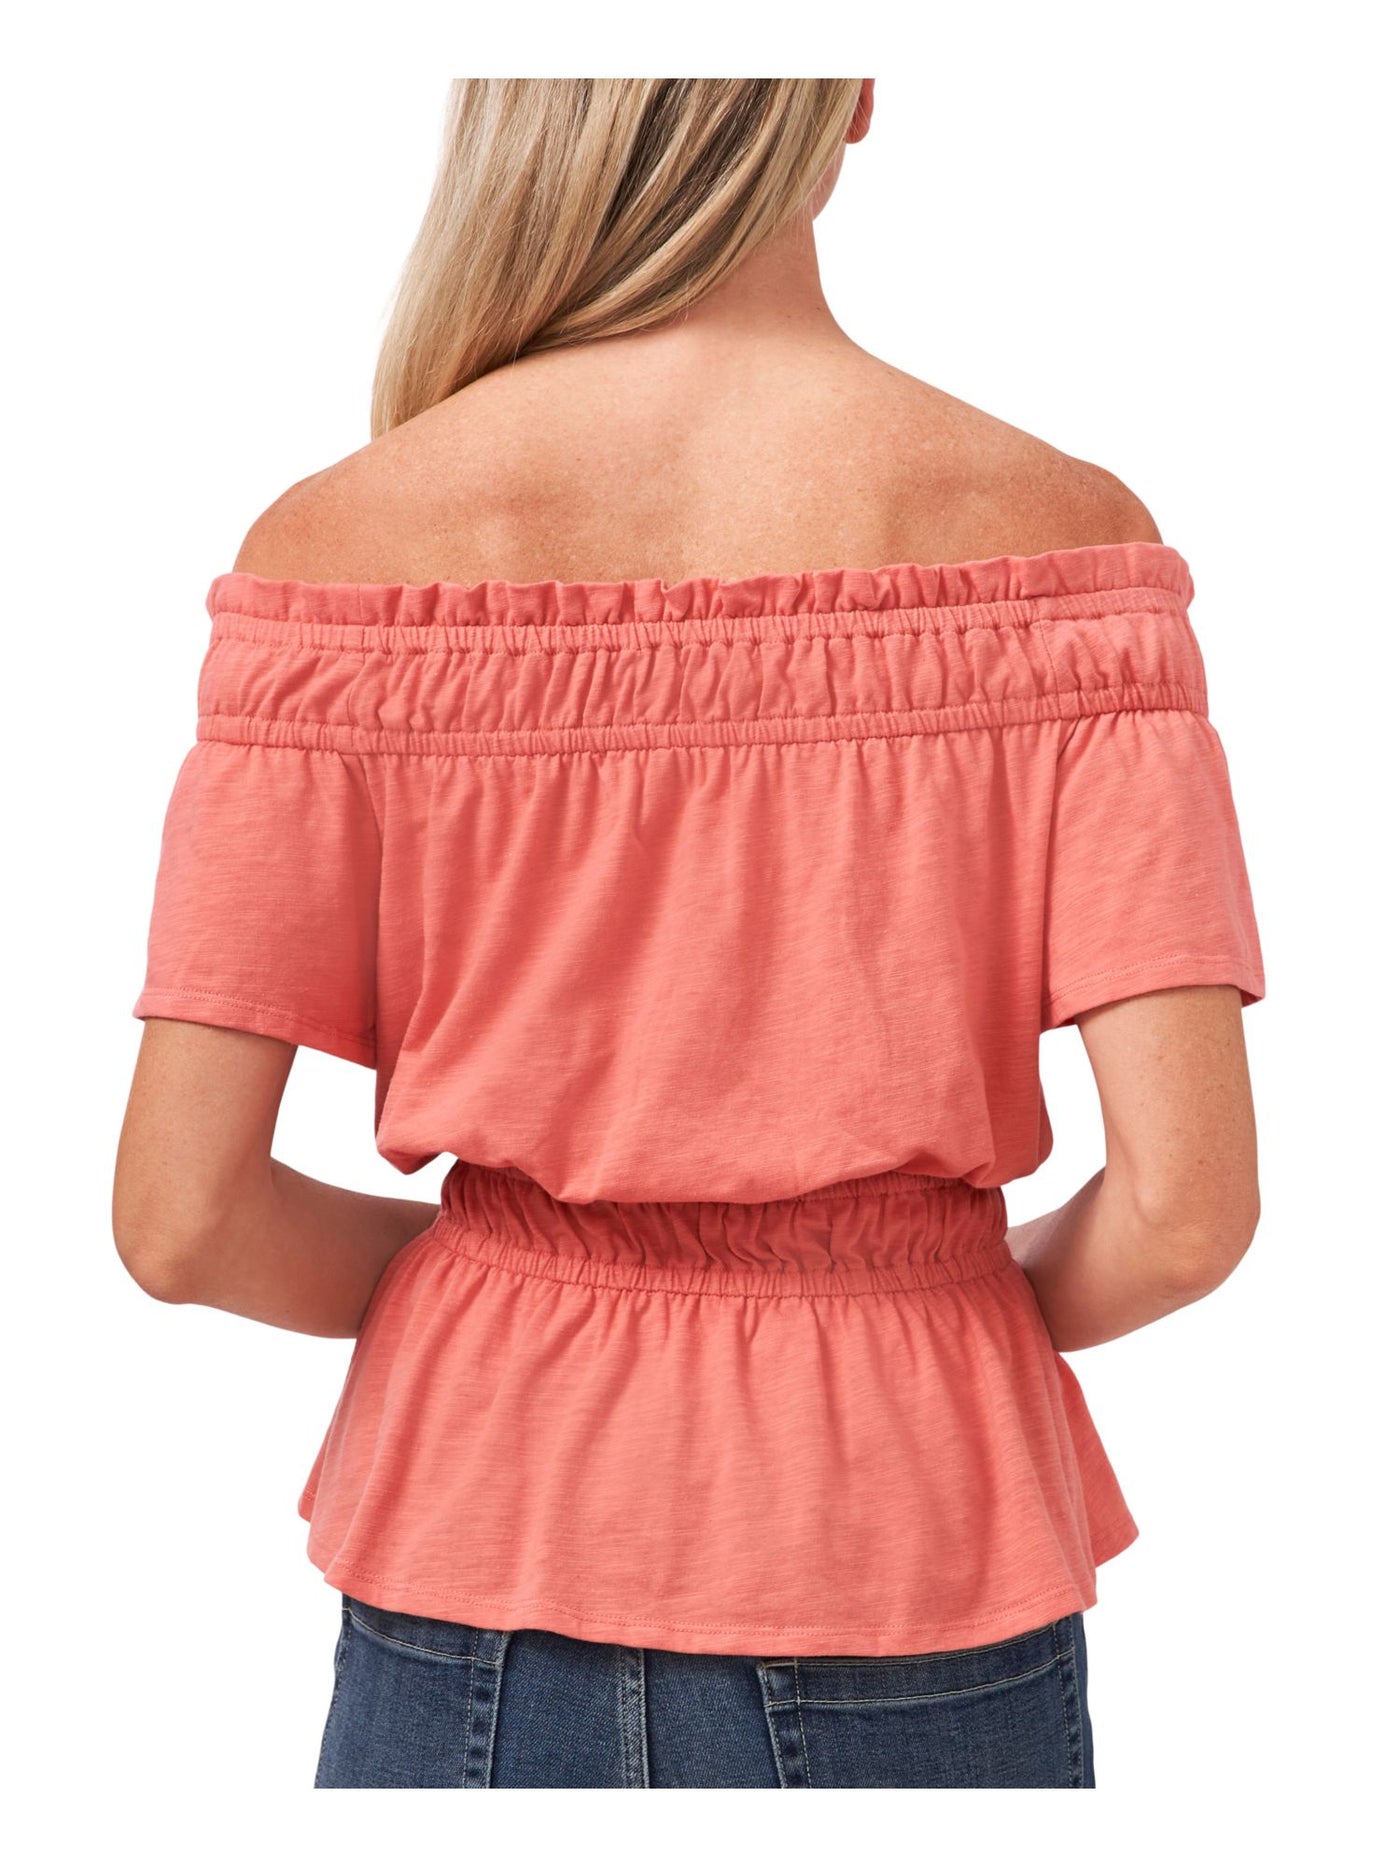 CECE Womens Coral Stretch Ruffled Elastic Waist And Neck Off Shoulder Peplum Top S